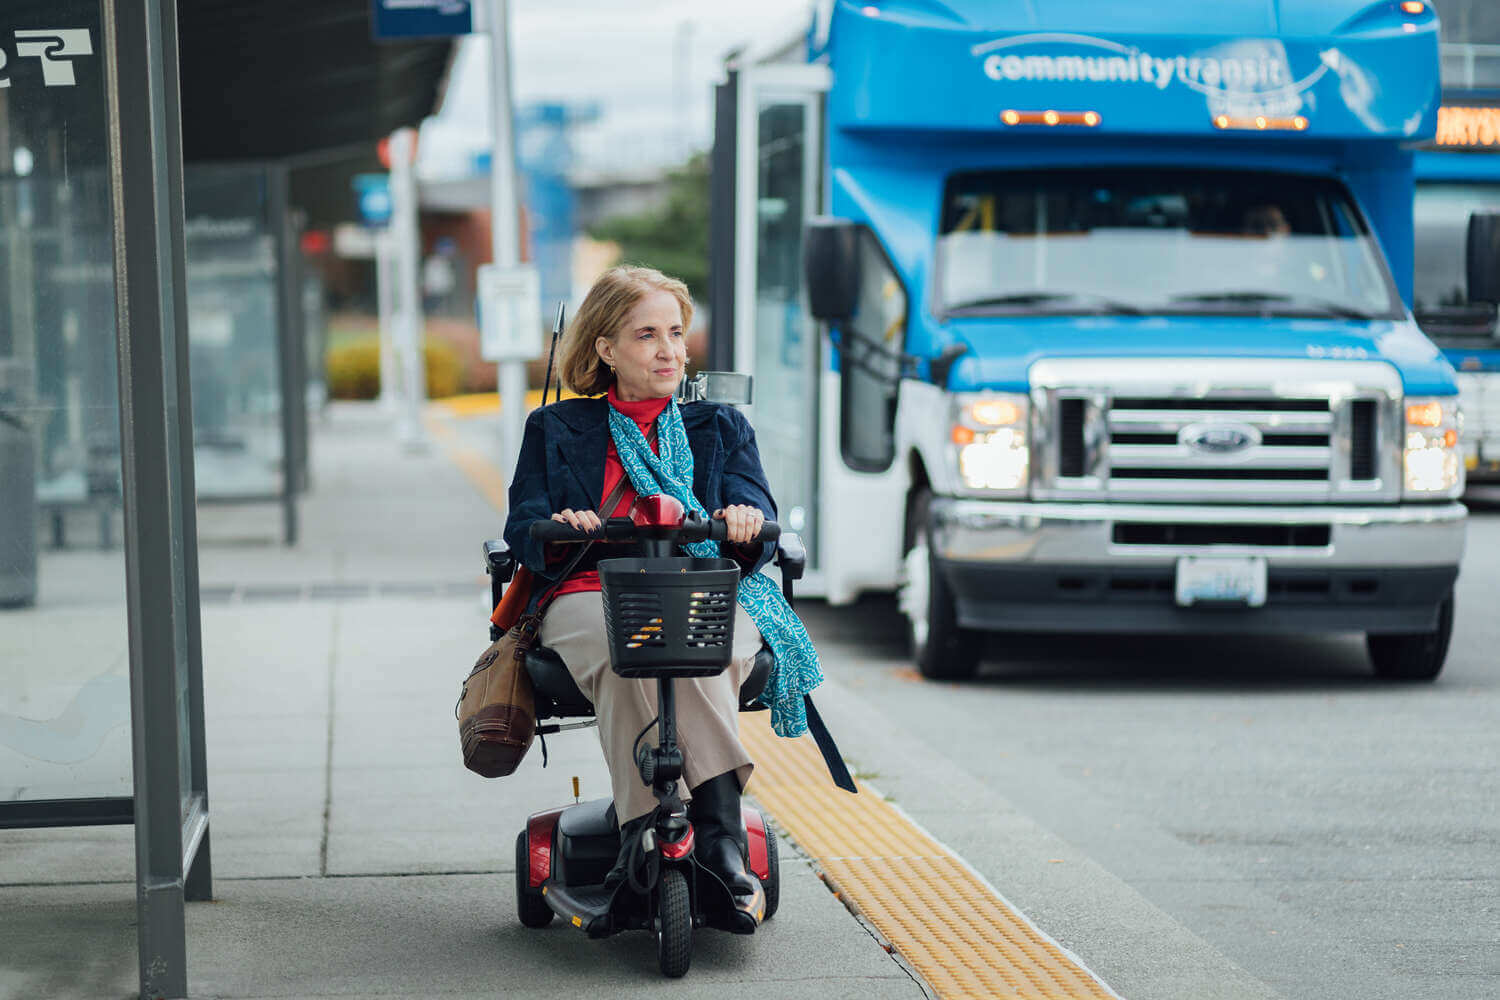 Lindsay on her commute using Light Rail and Community Transit